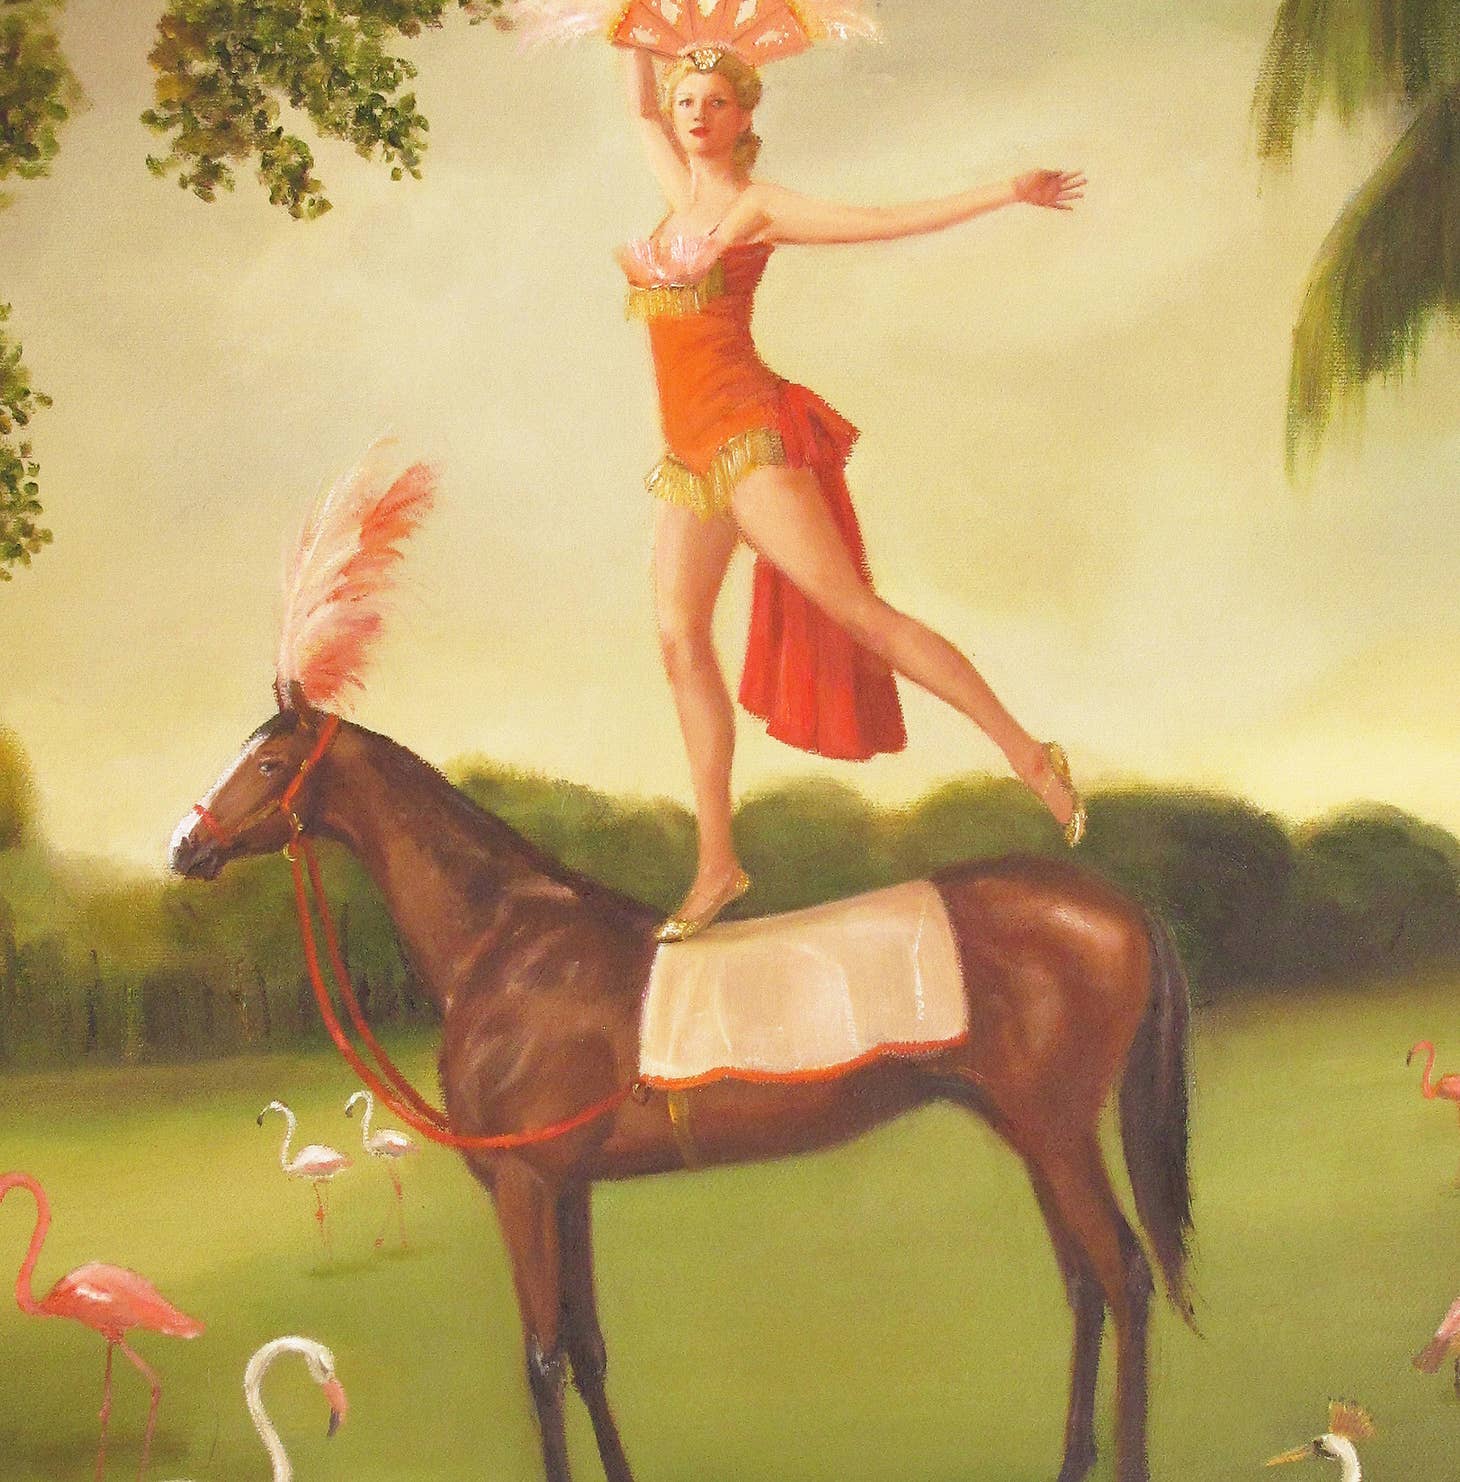 Colourful art print of 1920's dressed woman, balancing on top of horse. Flamingos in foreground and background.